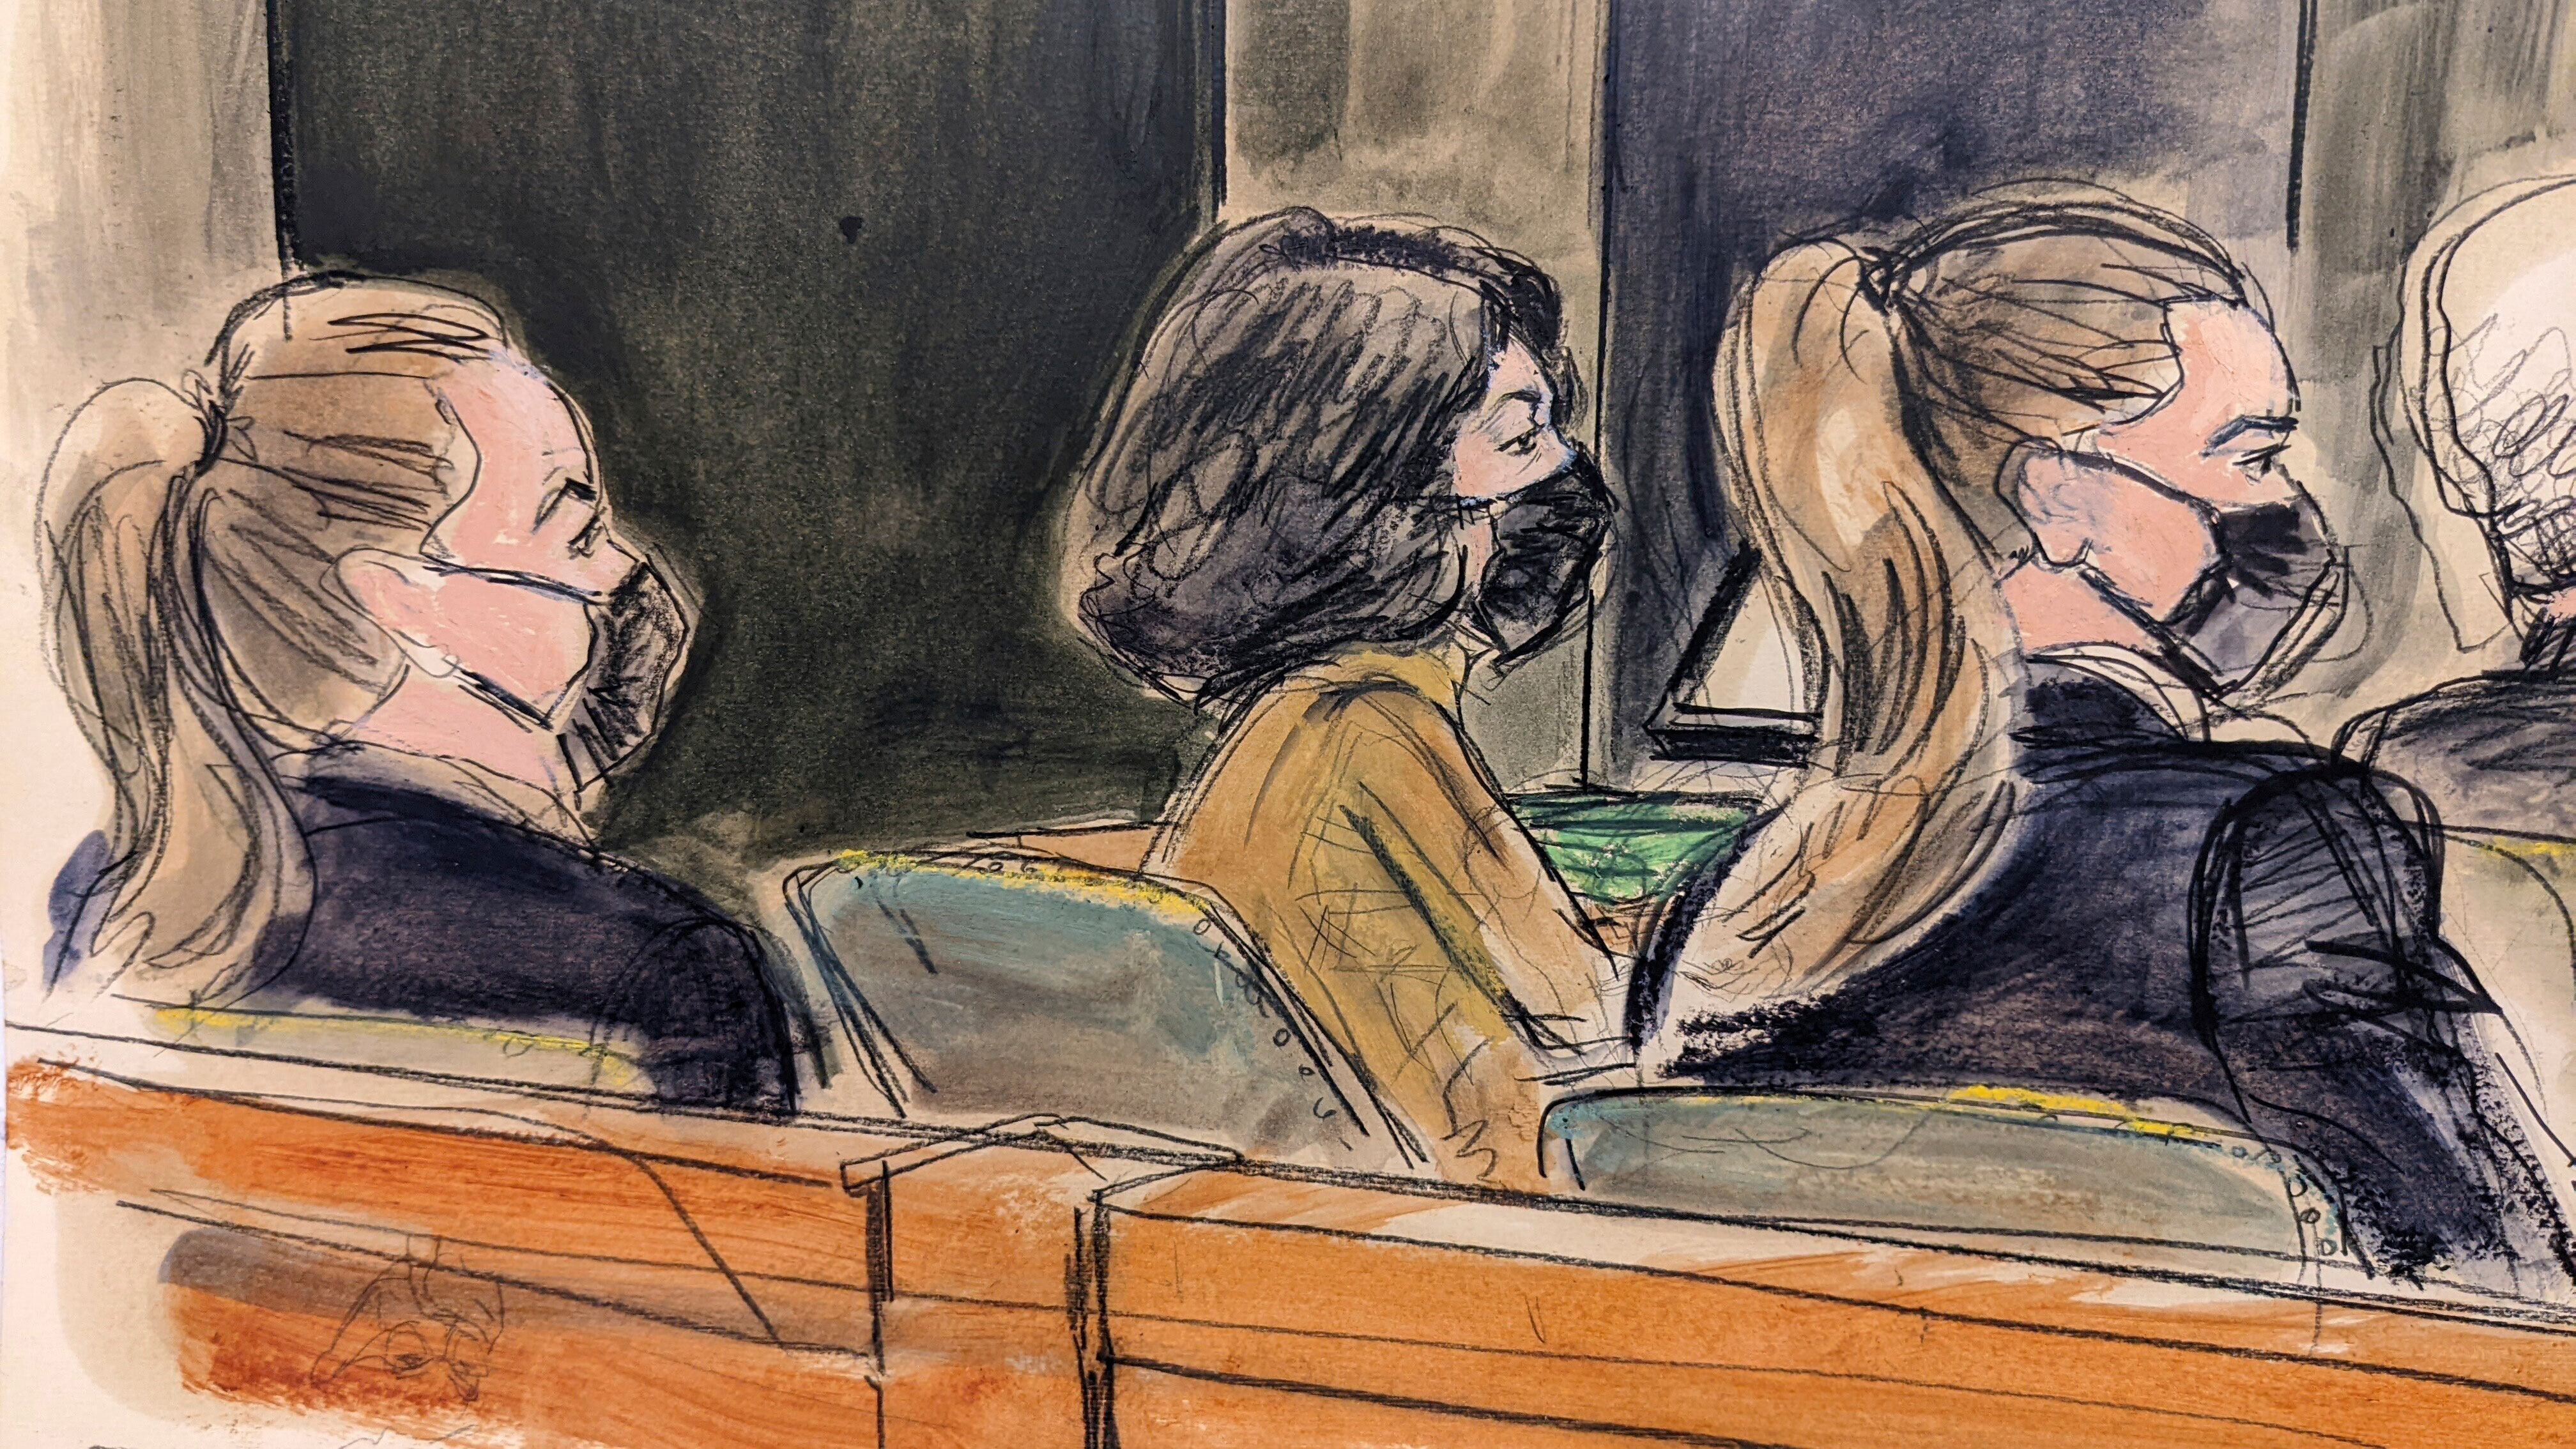 This courtroom sketch shows Ghislaine Maxwell, centre, seated in court at defence table between two US Marshals seated in foreground, watching proceedings in her sex abuse trial in New York.